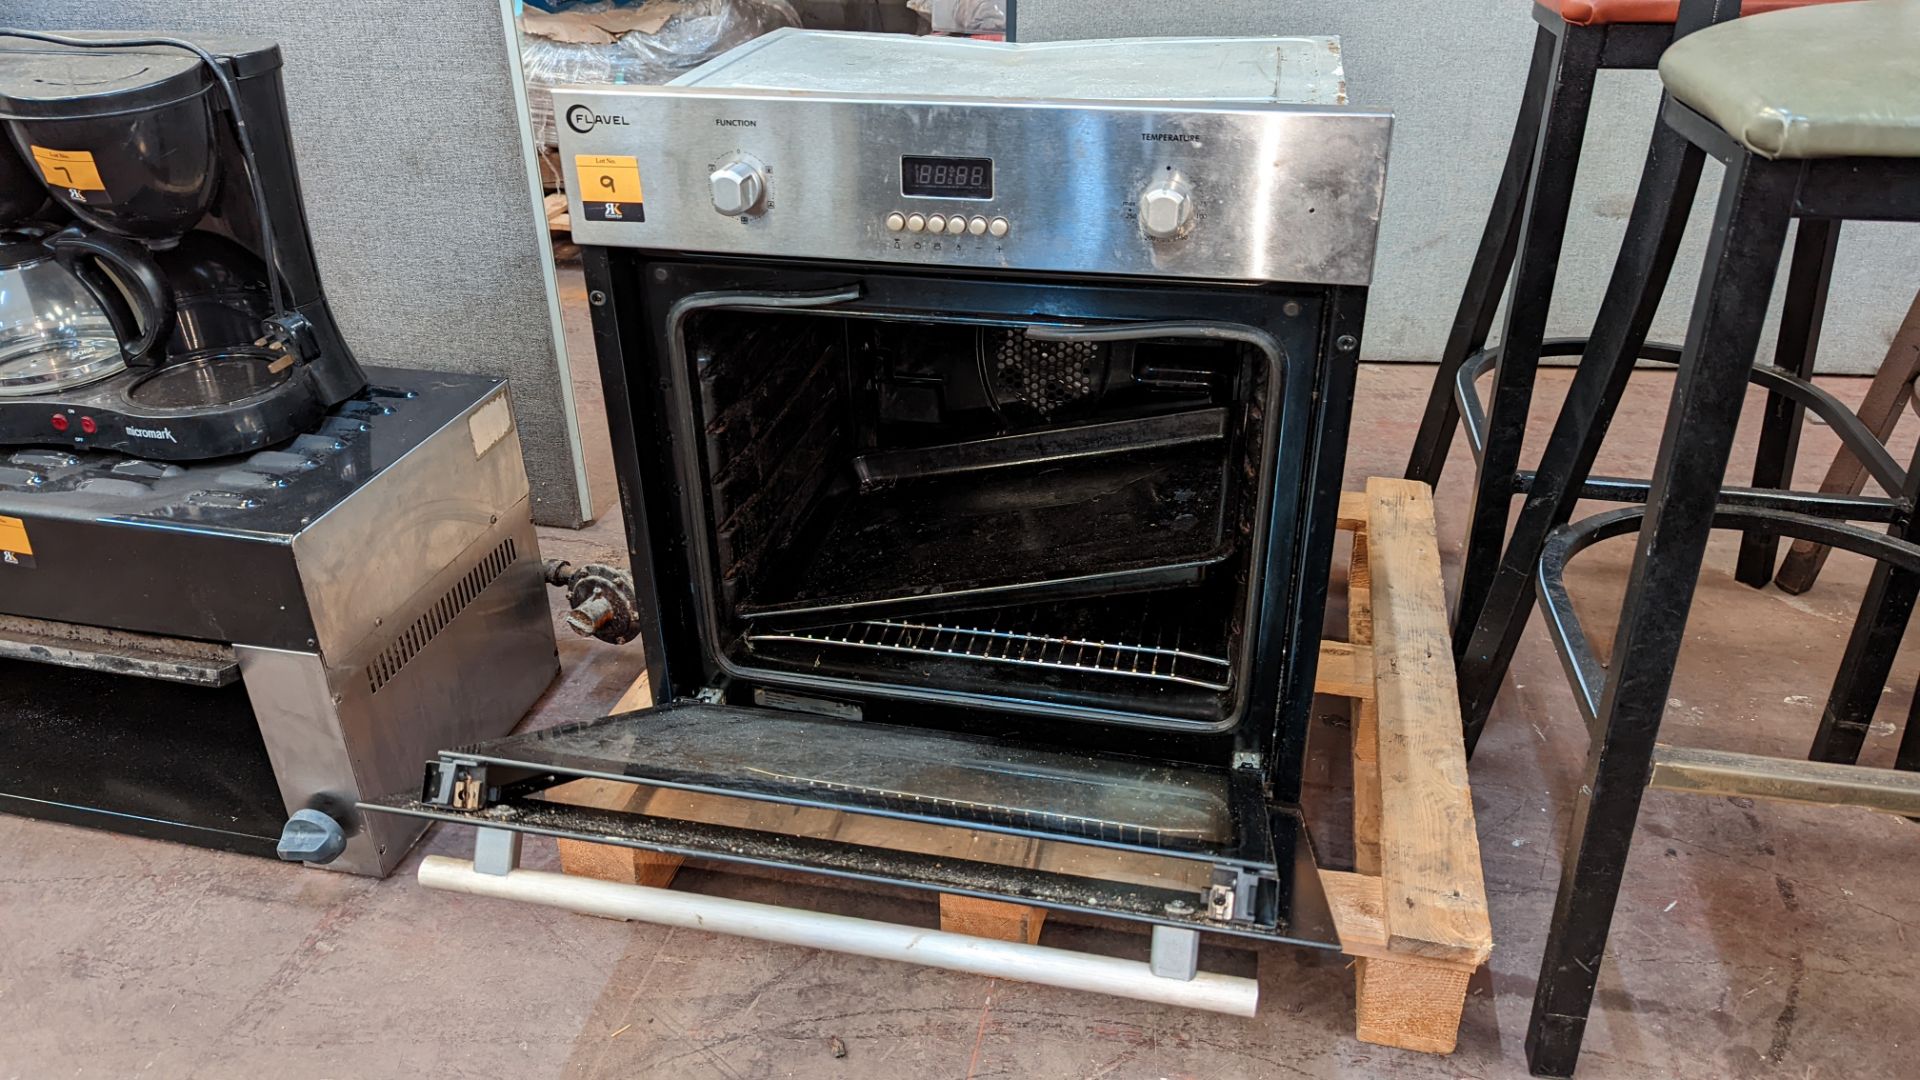 Flavel domestic integrated oven - Image 6 of 6